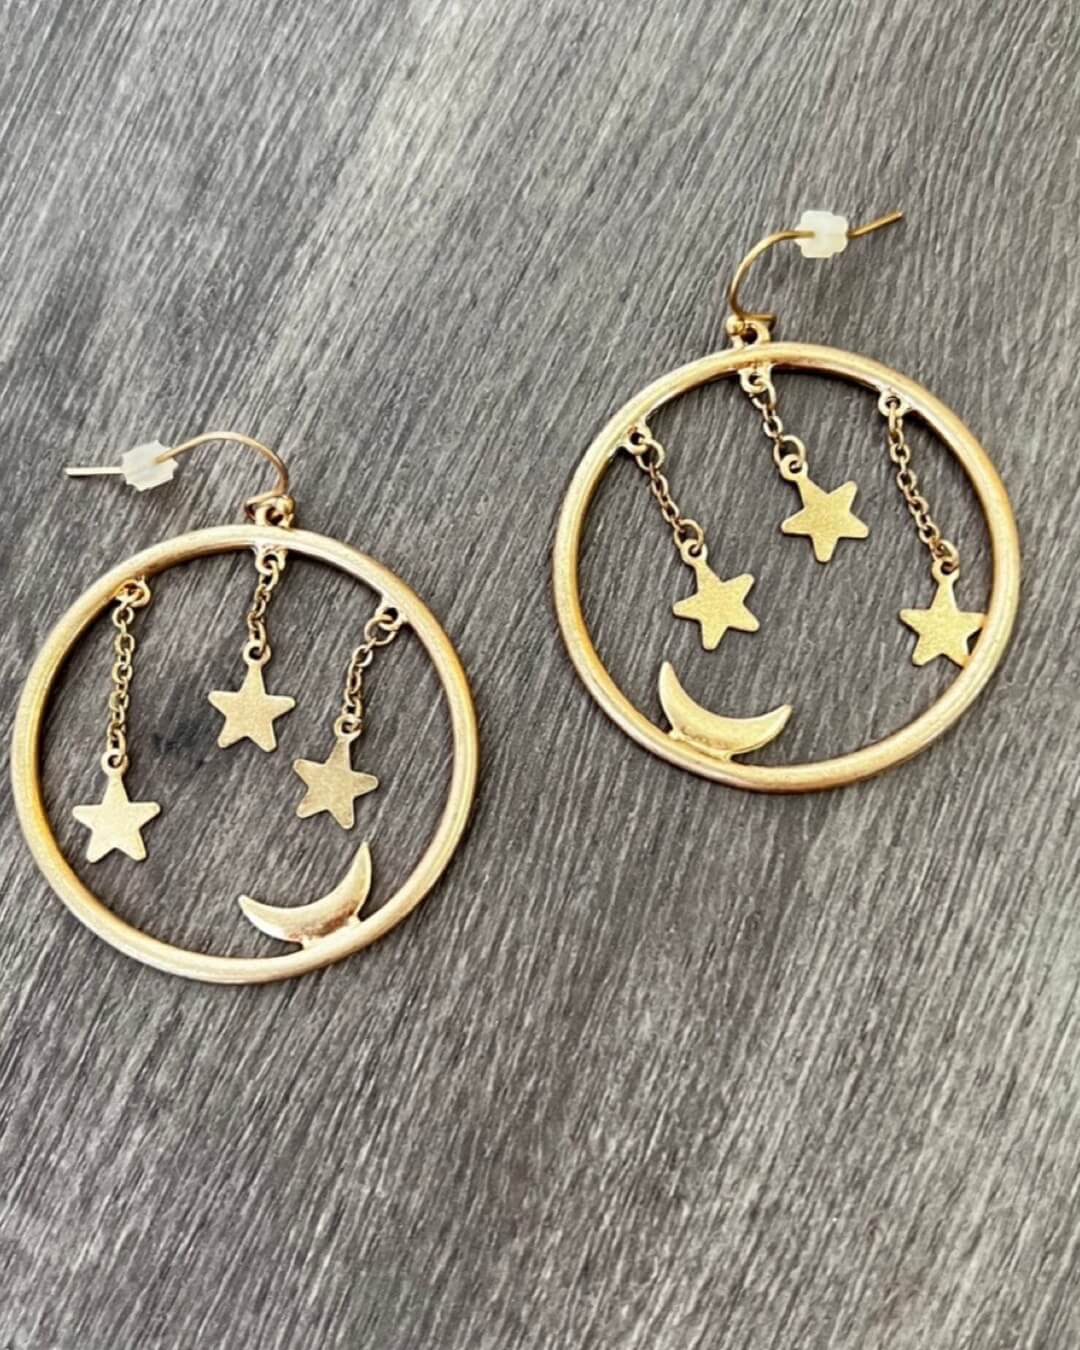 Gold hoops with stars